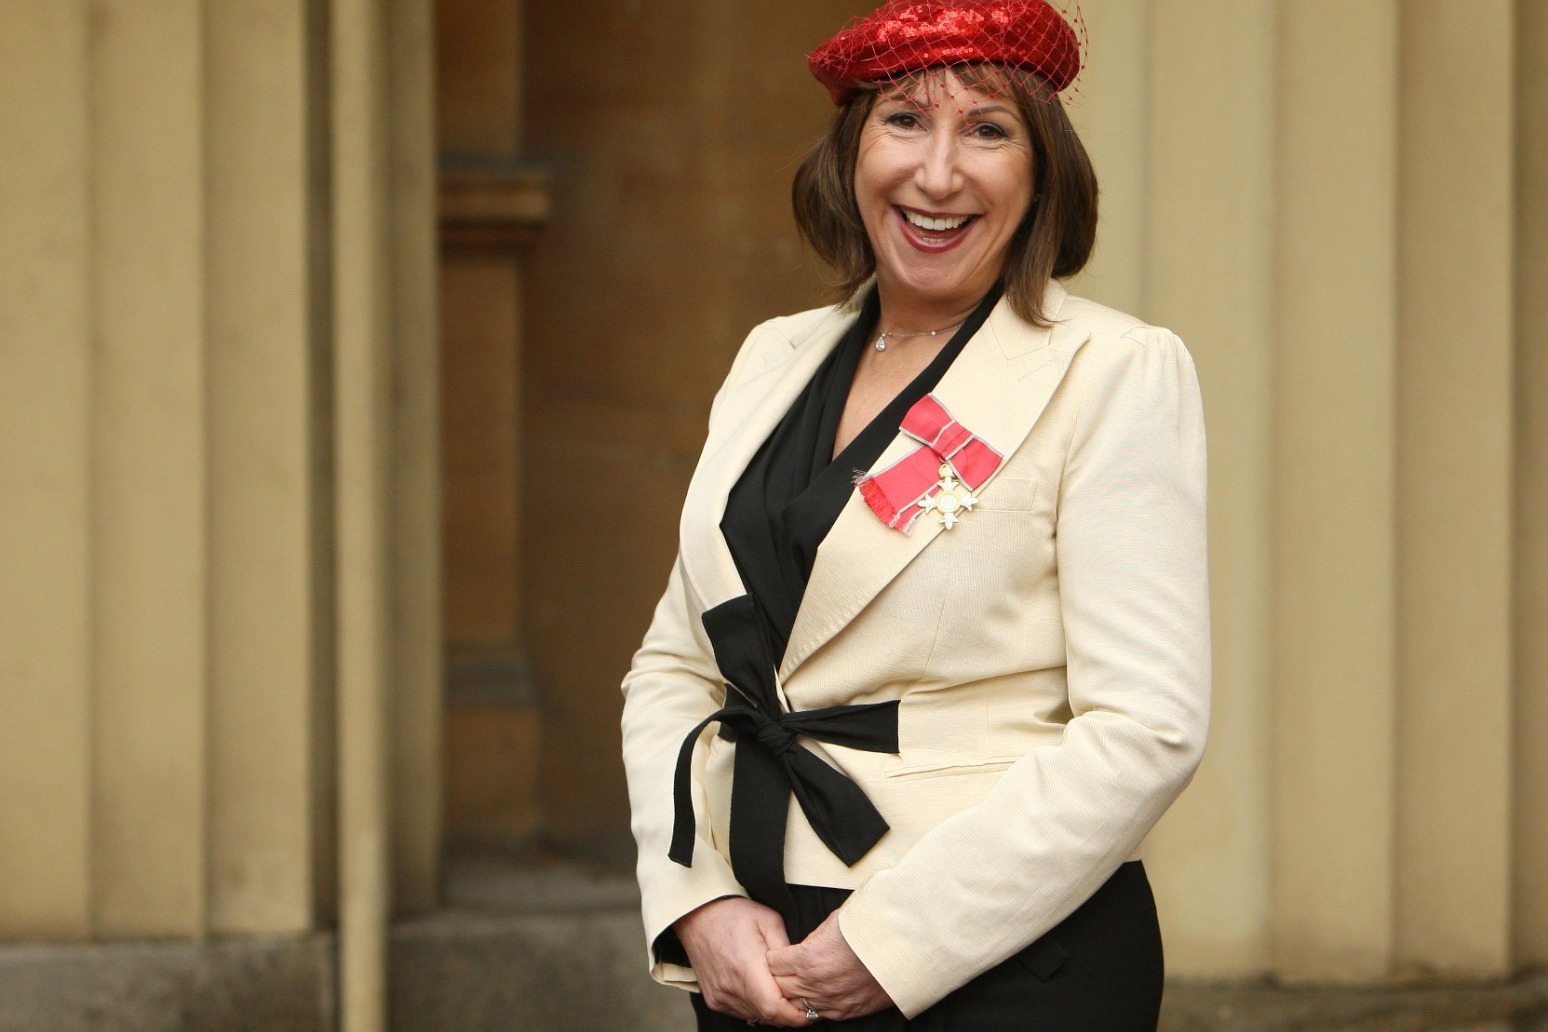 Girlfriends and Band of Gold writer Kay Mellor dies aged 71 